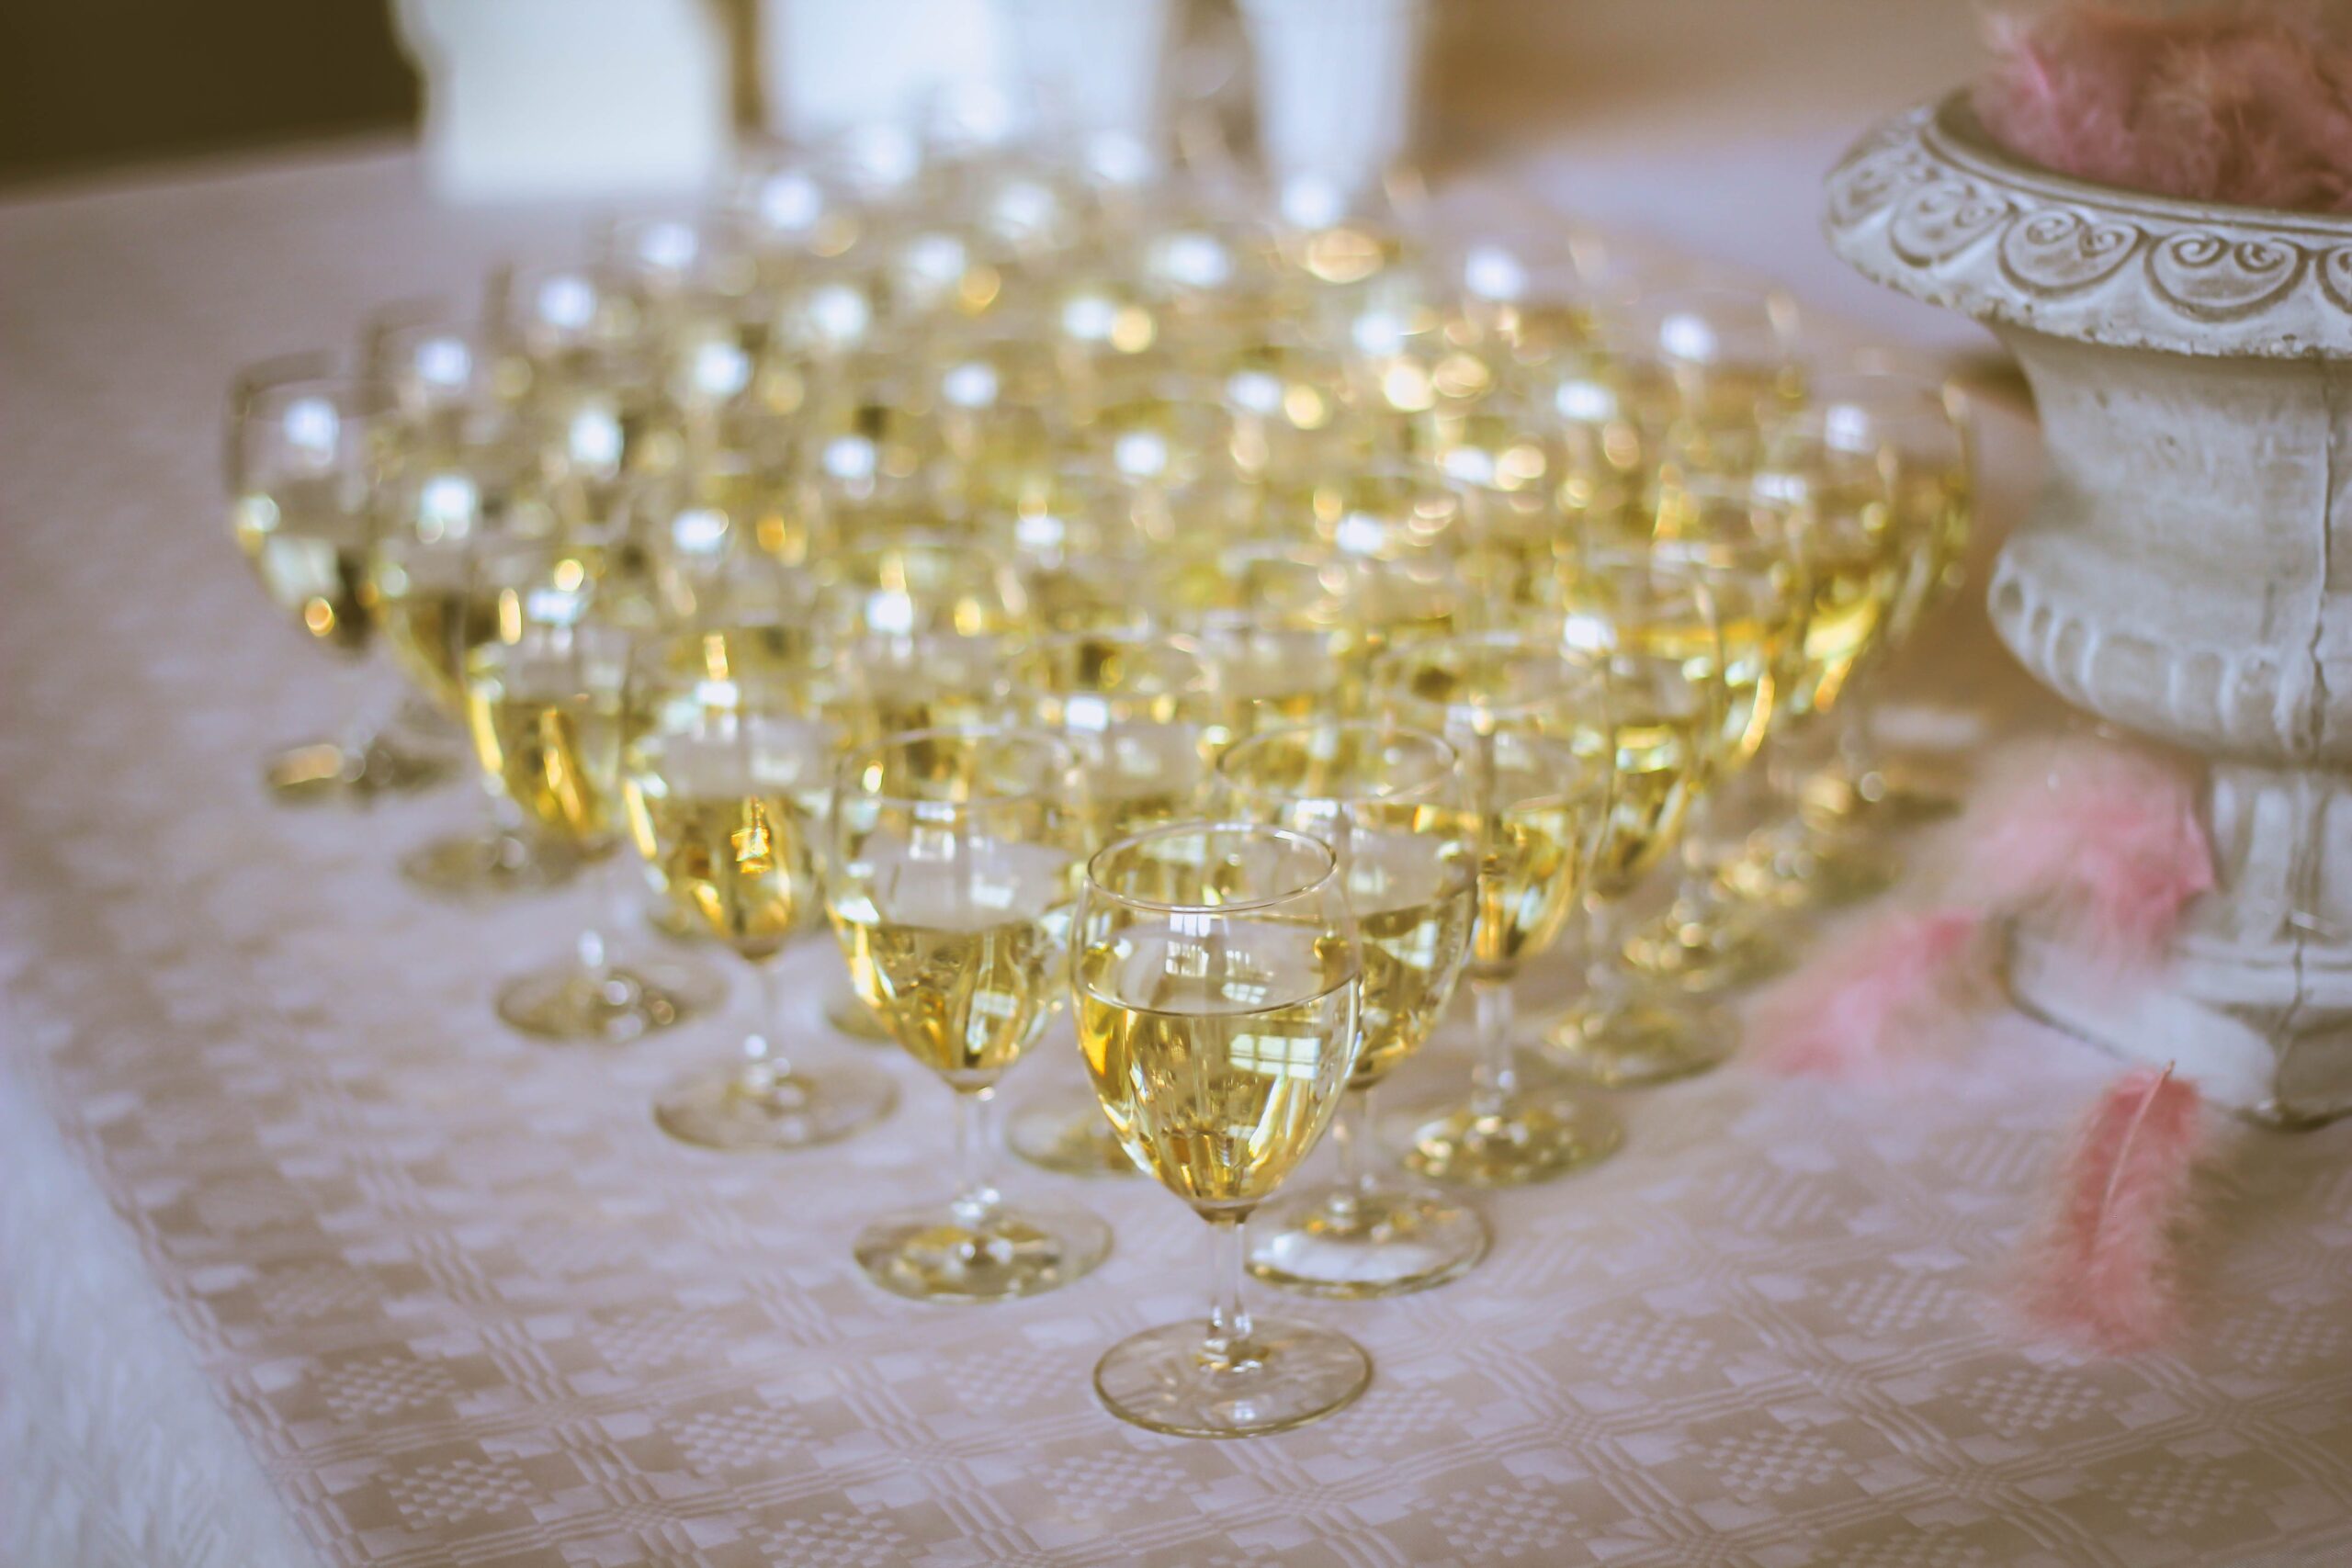 Champagne glasses are lined up on a table for hen party activities.